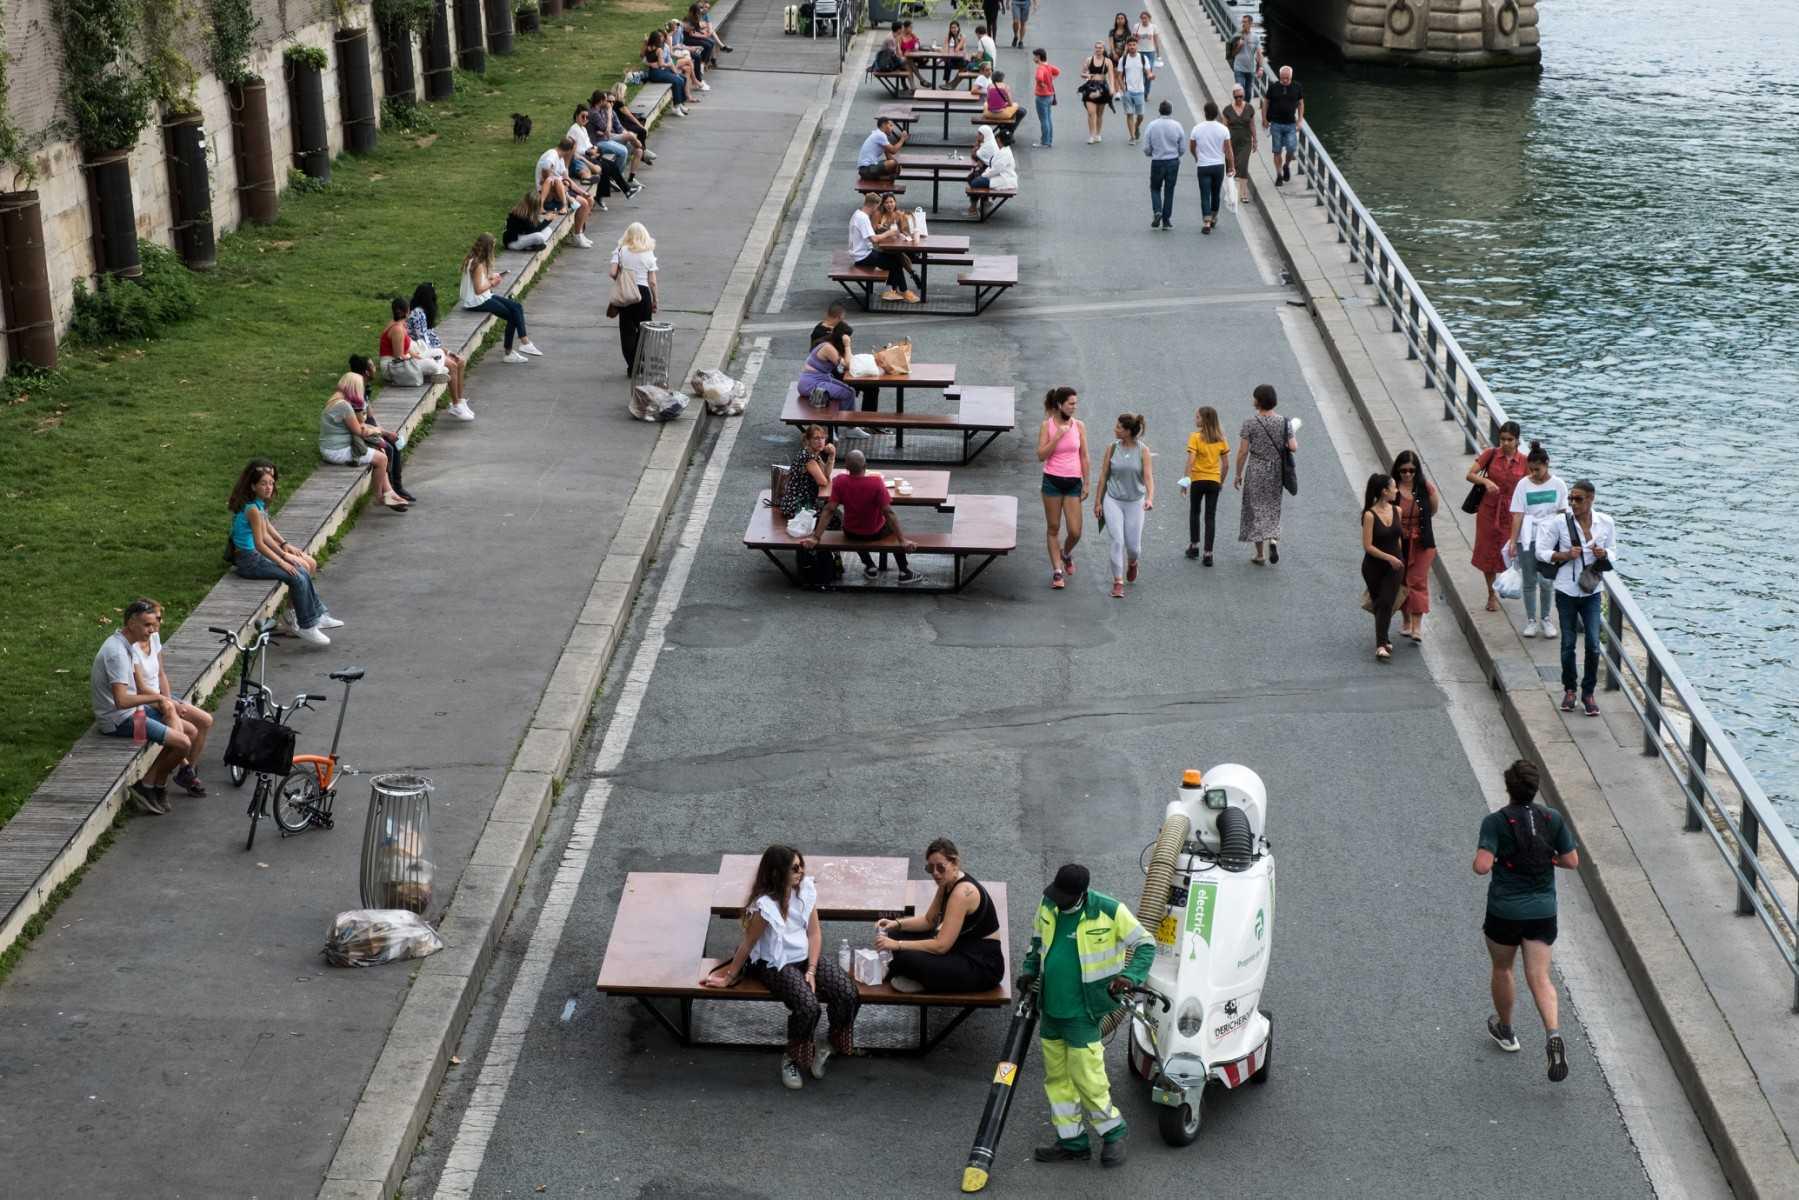 A street cleaner cleans the sidewalk as pedestrians walk and sit on tables along the Seine river in Paris on Sept 4. Photo: AFP